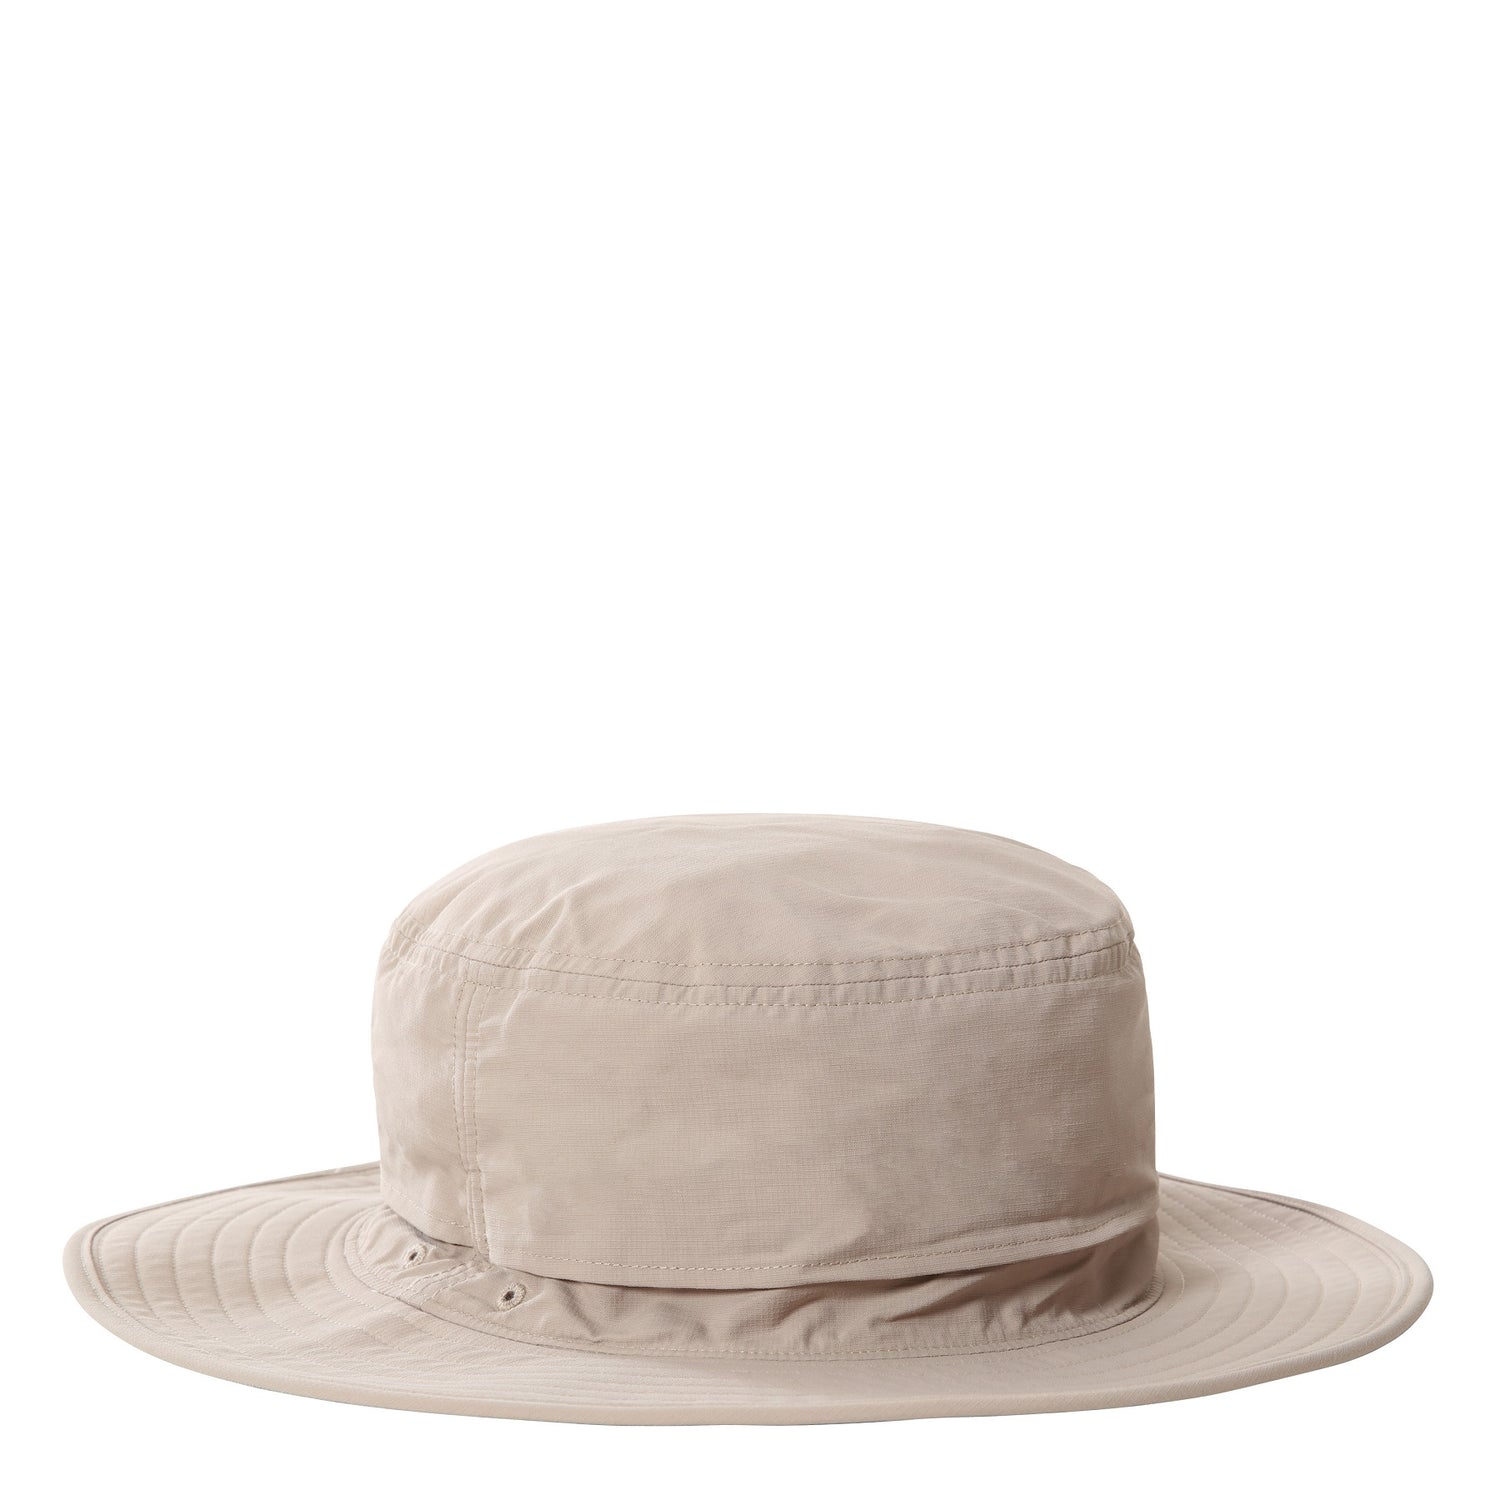 The North Face Horizon Breeze Brimmer Hat 